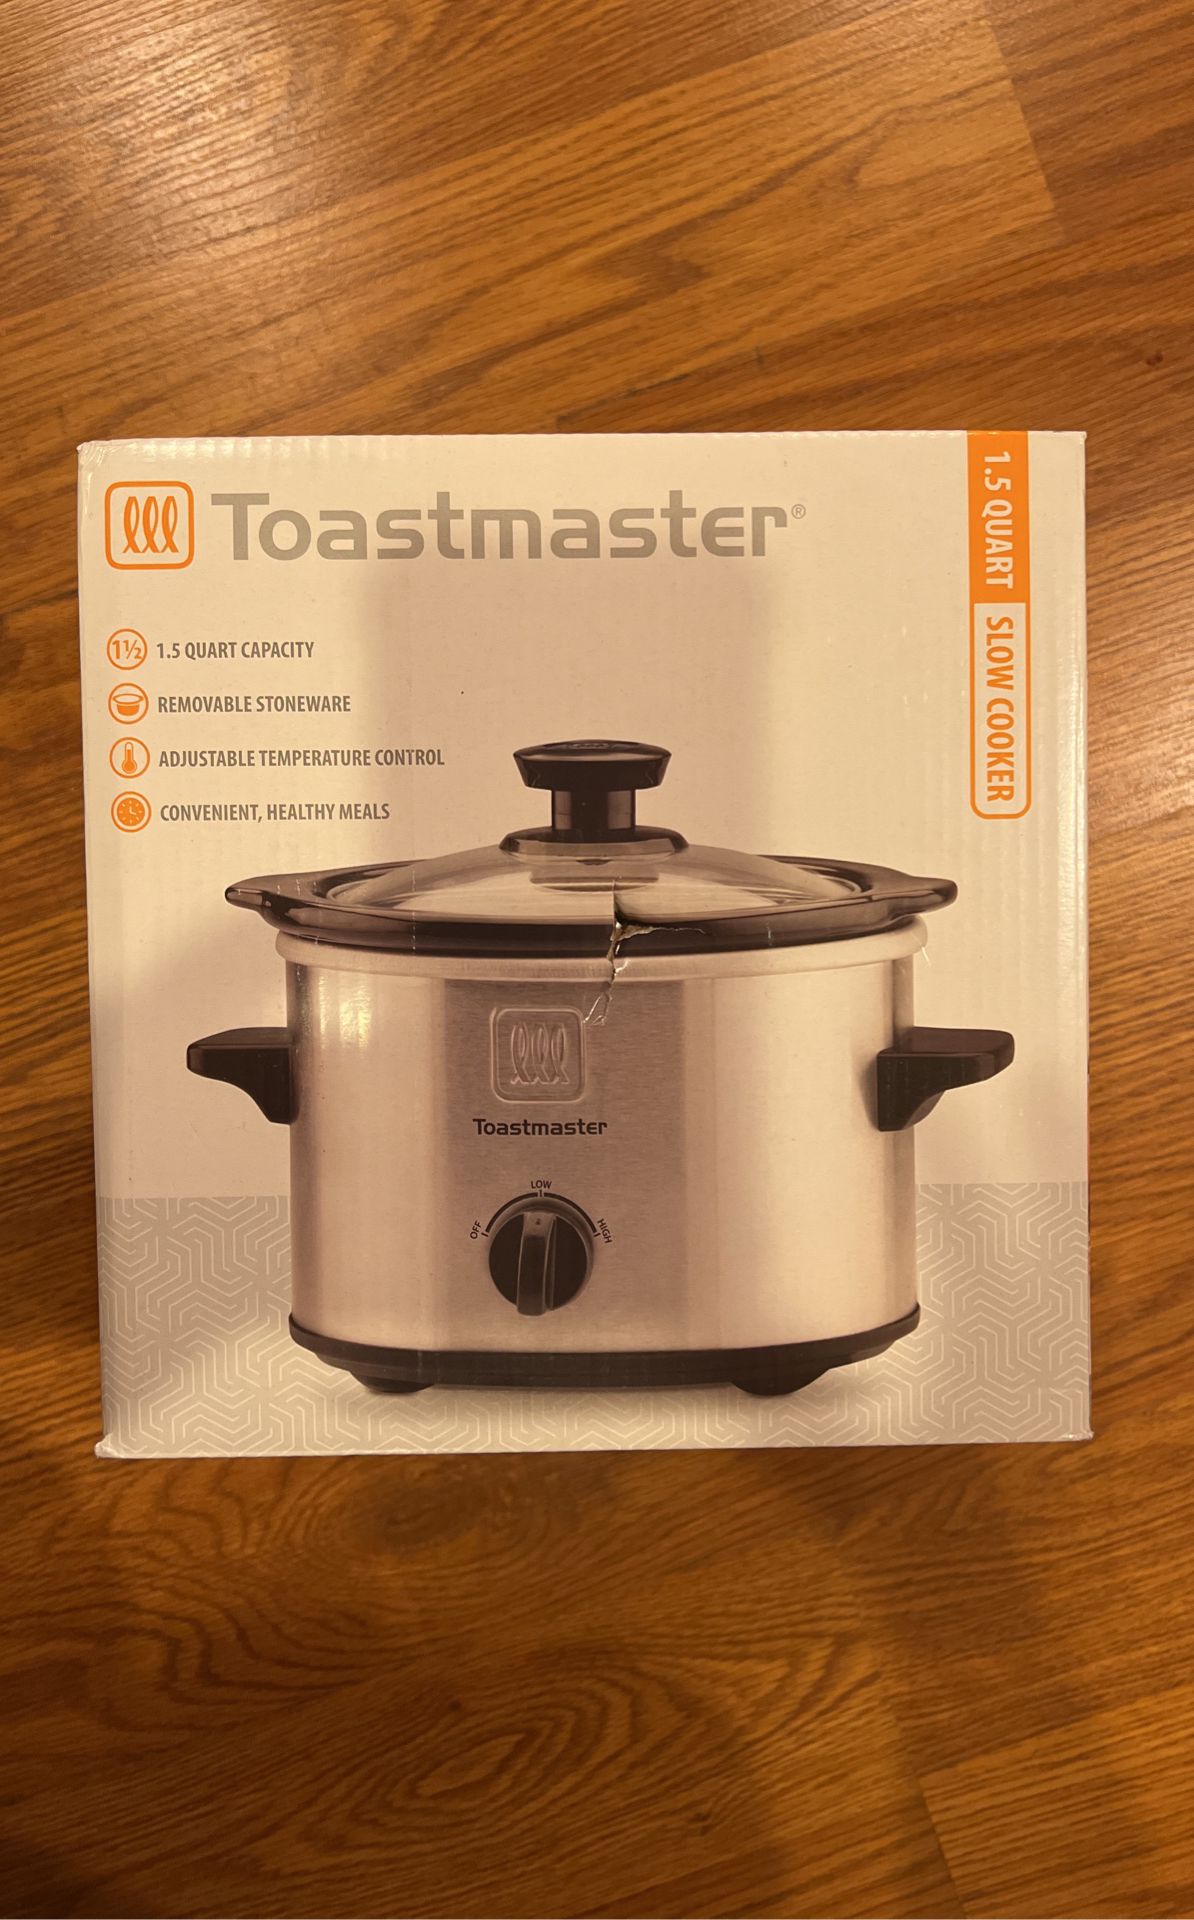 Toastmaster 1.5 Quart Slow Cooker New 